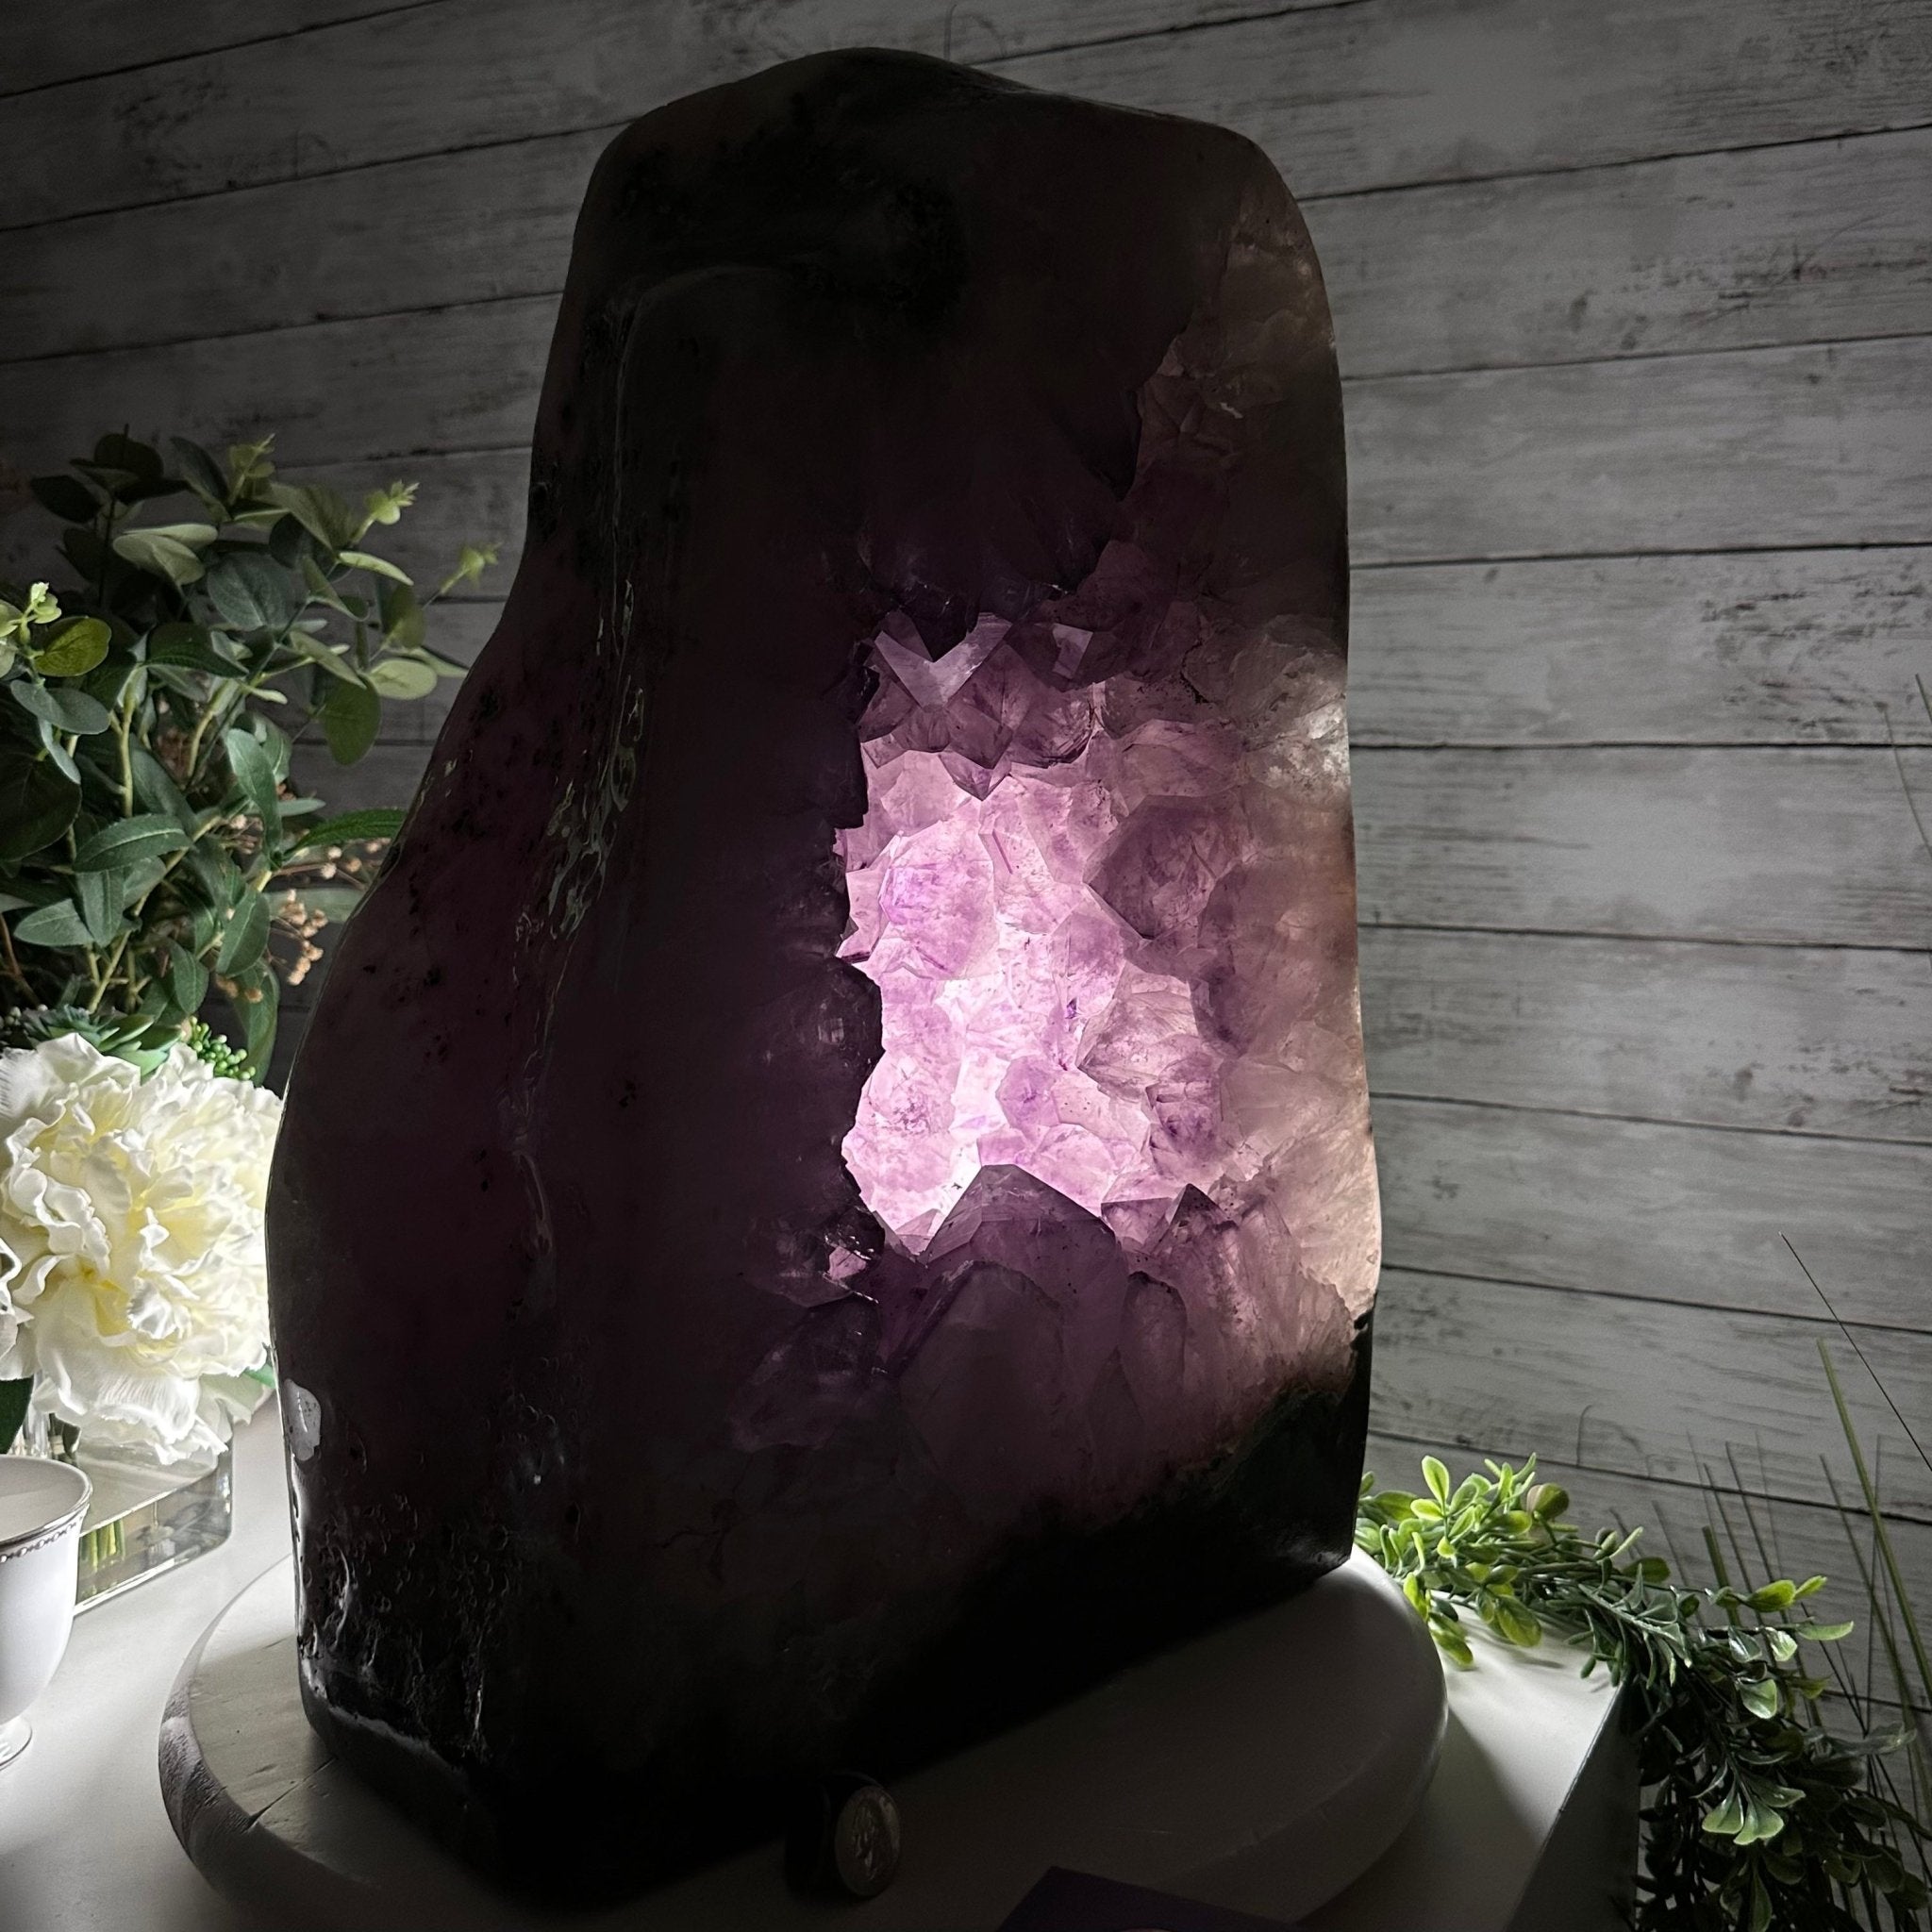 Extra Quality Polished Brazilian Amethyst Cathedral, 87.3 lbs & 17.75" tall Model #5602-0009 by Brazil Gems - Brazil GemsBrazil GemsExtra Quality Polished Brazilian Amethyst Cathedral, 87.3 lbs & 17.75" tall Model #5602-0009 by Brazil GemsPolished Cathedrals5602-0009